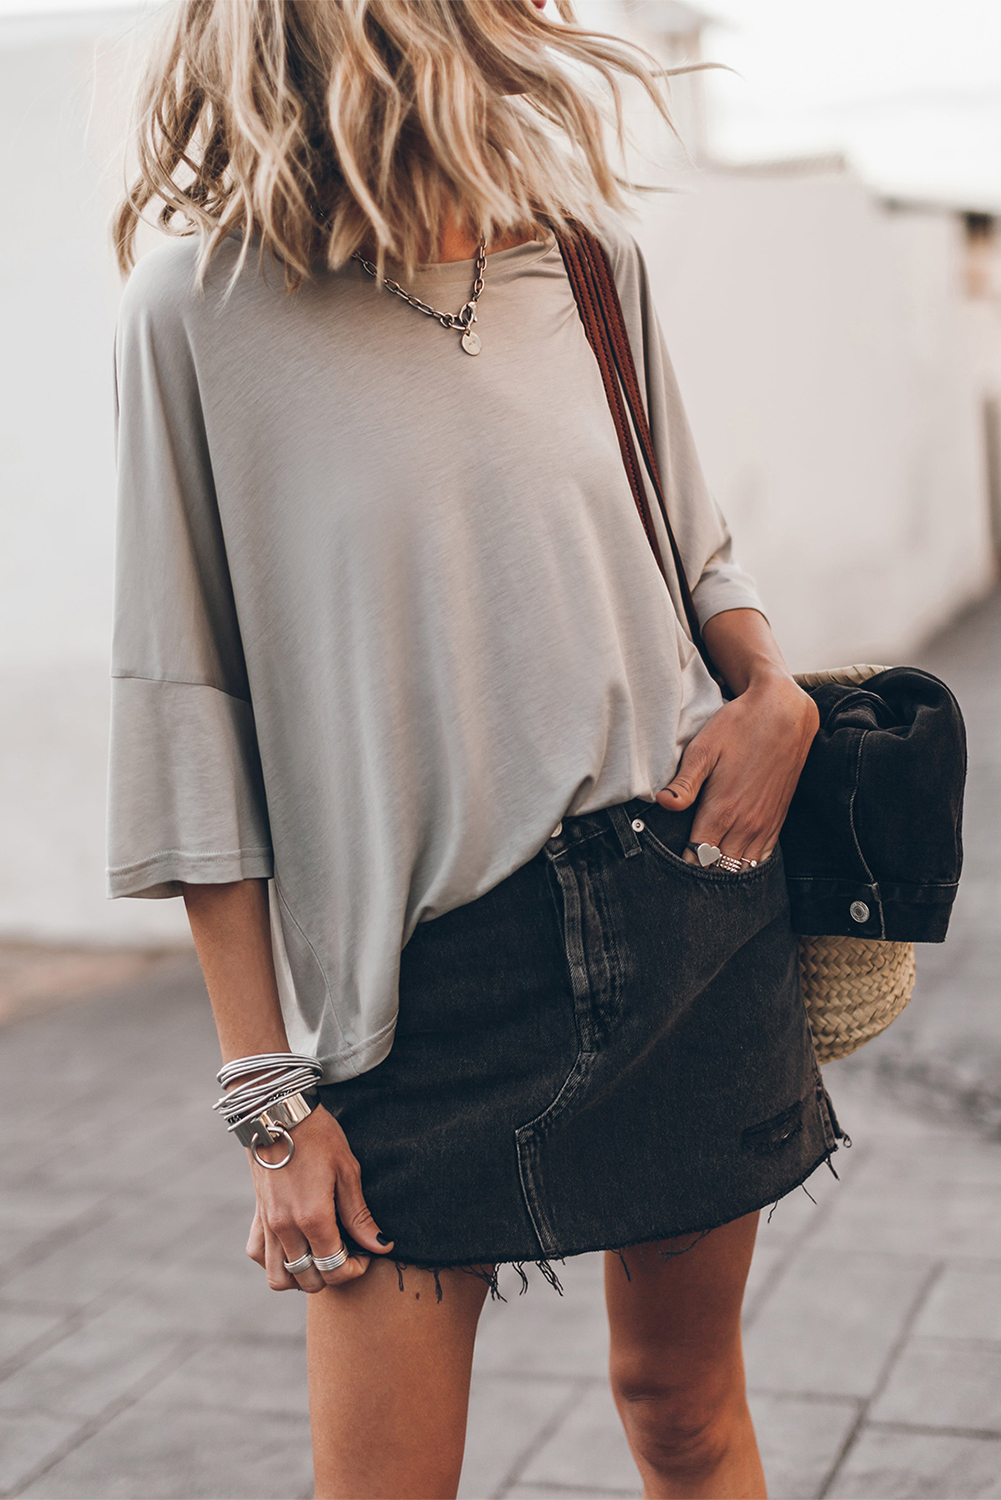 Shewin Wholesale Chic Lady Gray Oversized Flowy Dropped Shoulder T SHIRT